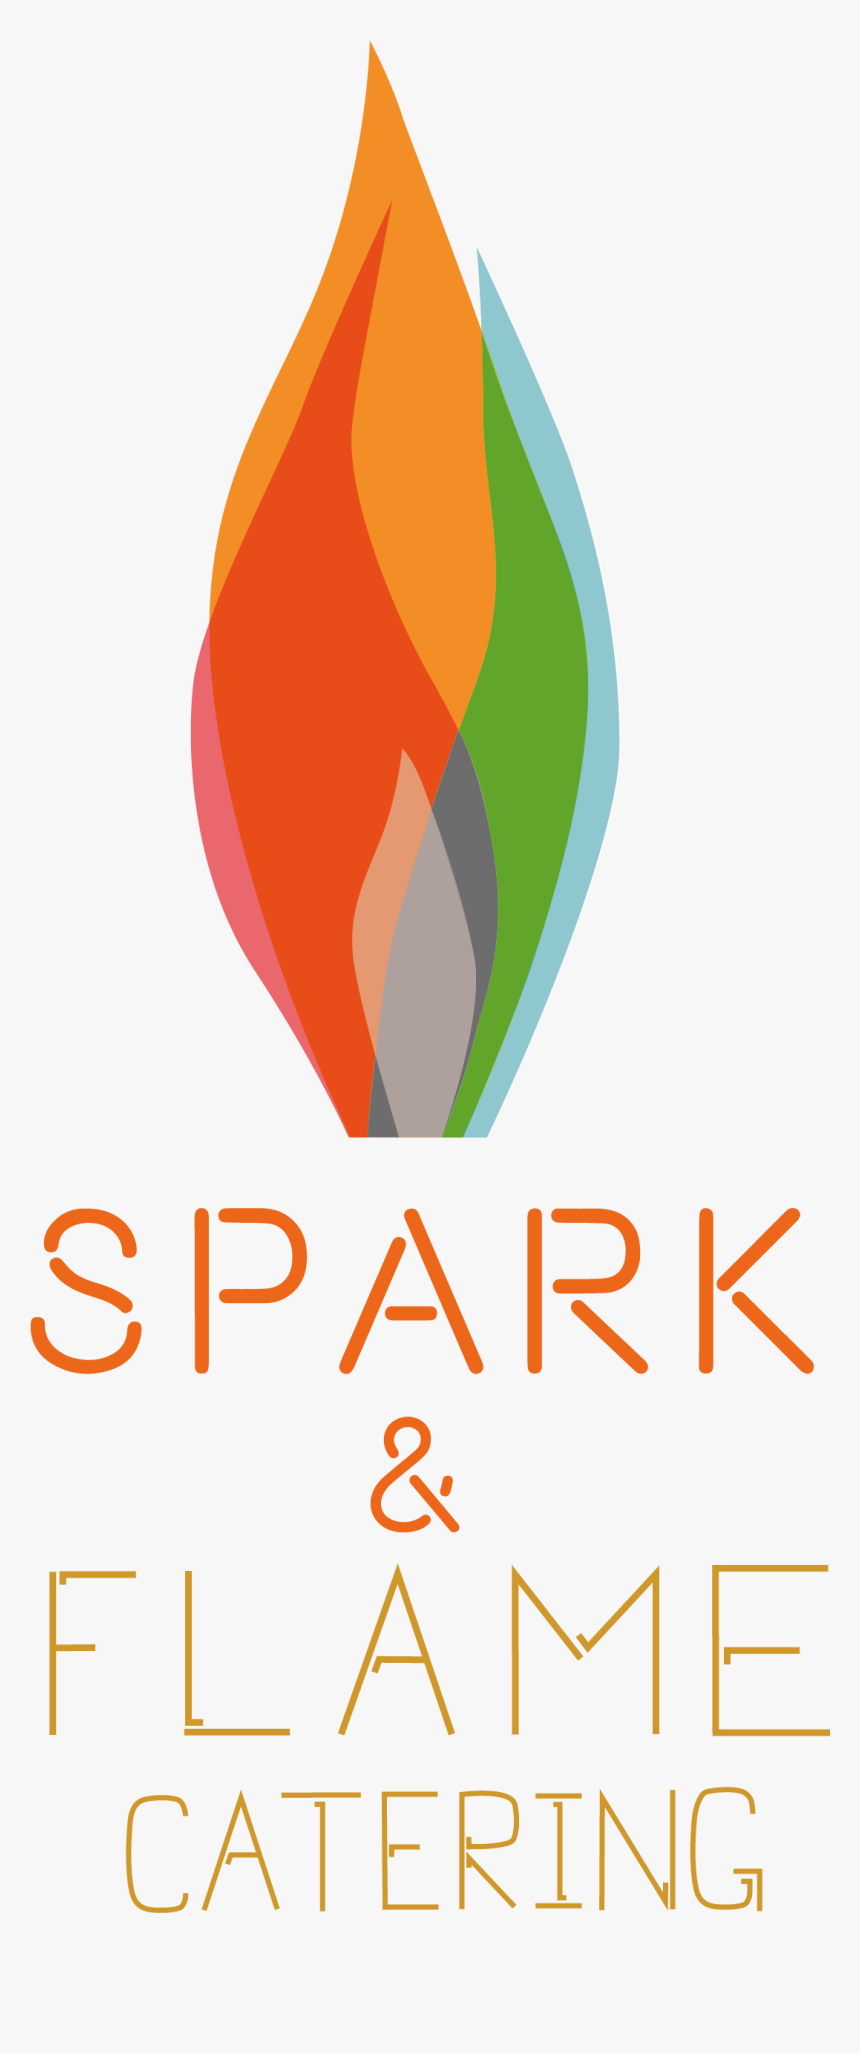 Spark & Flame Catering - Graphic Design, HD Png Download, Free Download